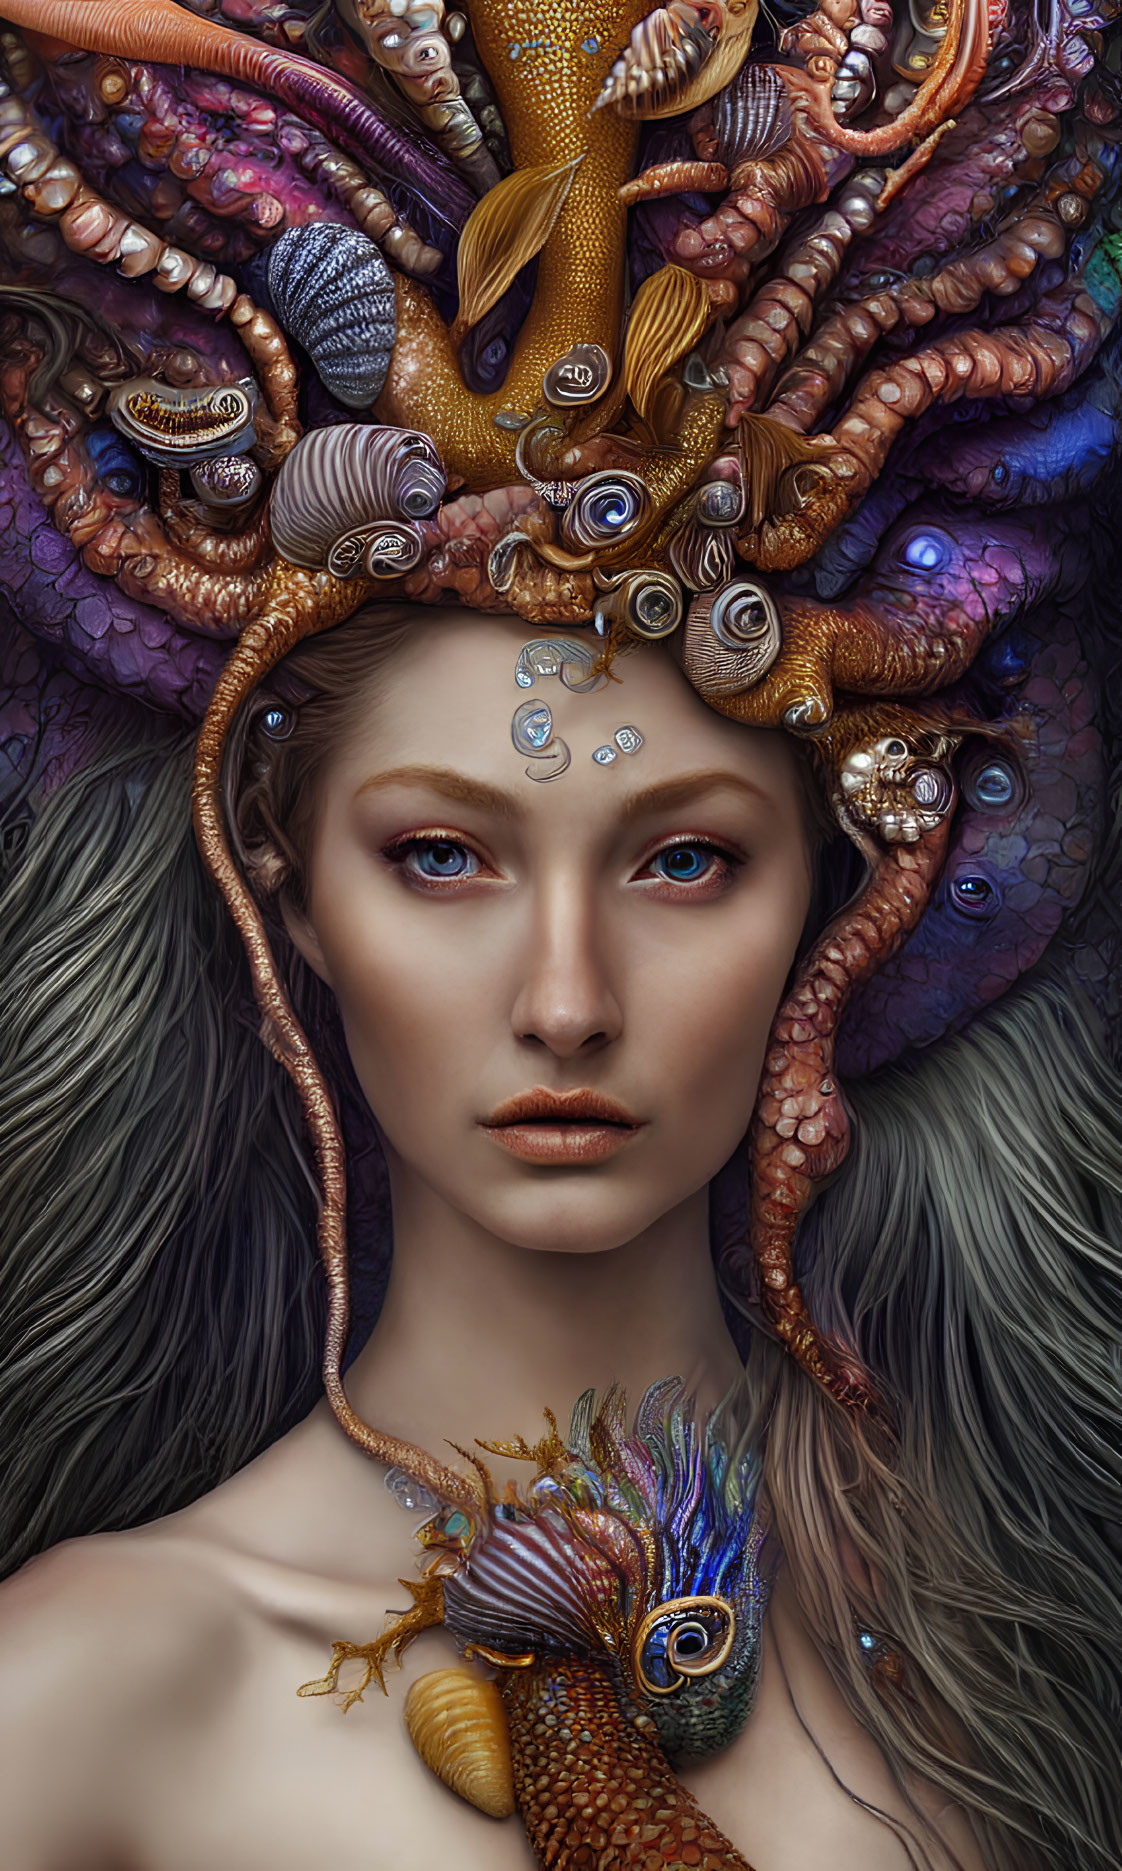 Woman with Blue Eyes Wearing Sea Creature Headpiece